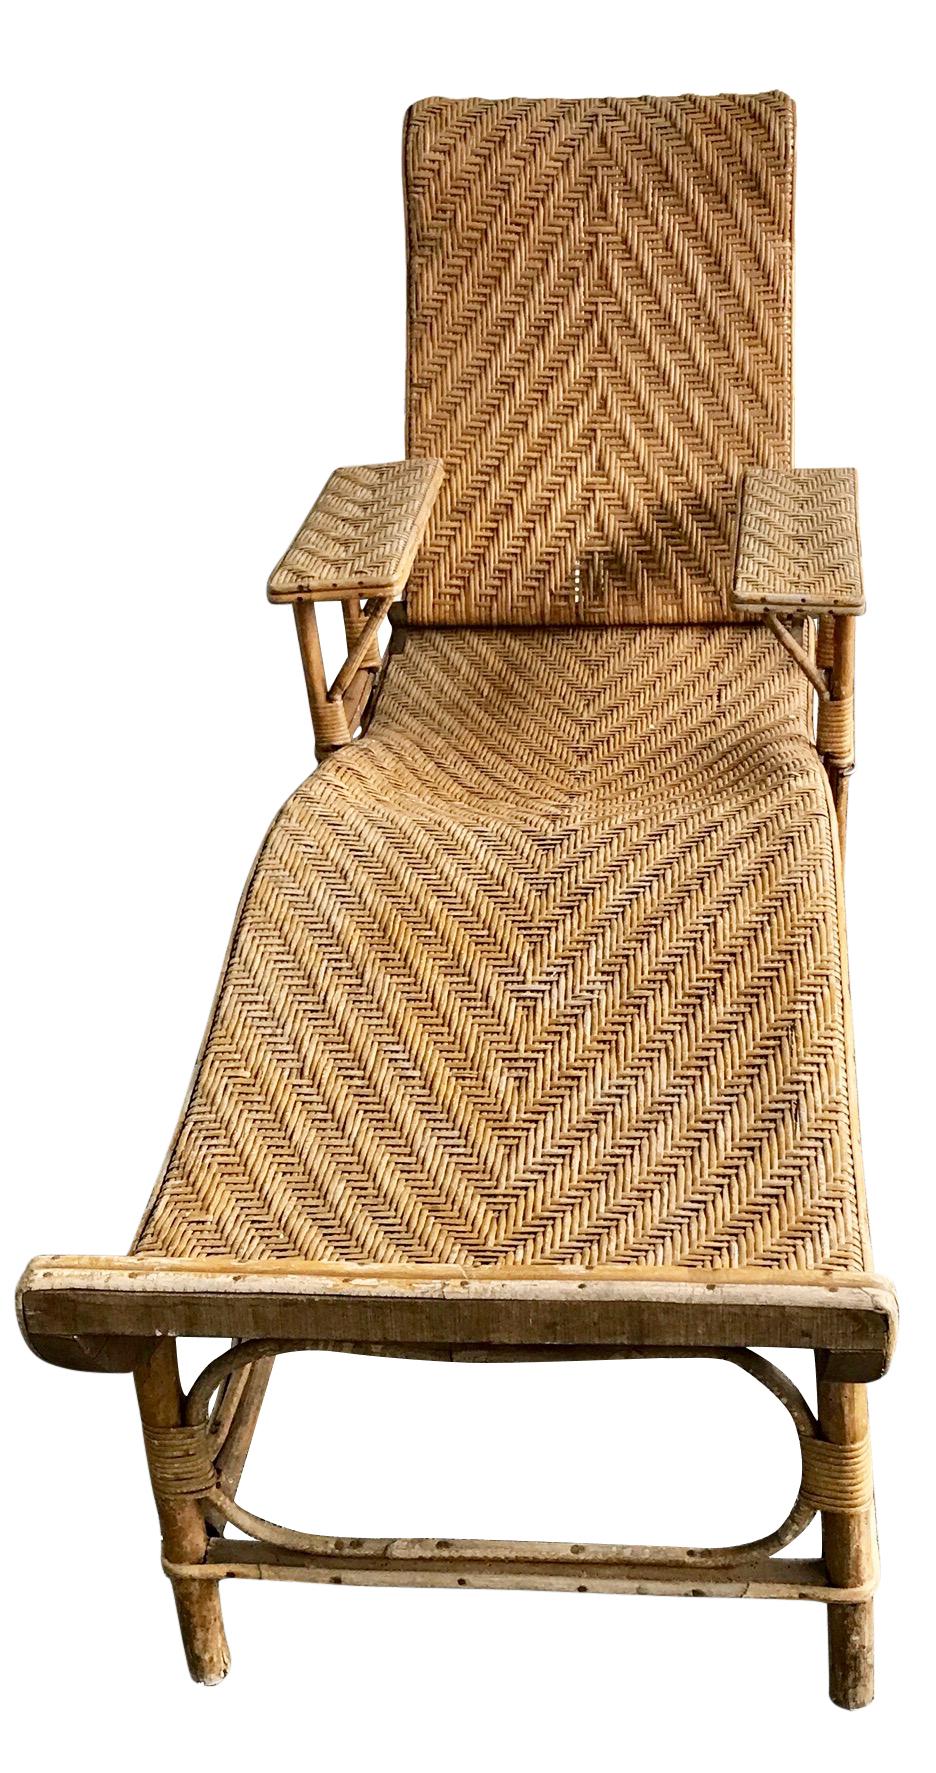 An adjustable chaise lounge from the 1920s is made of bamboo and woven rattan. The backrest can be placed in four positions and the armrests can be removed.